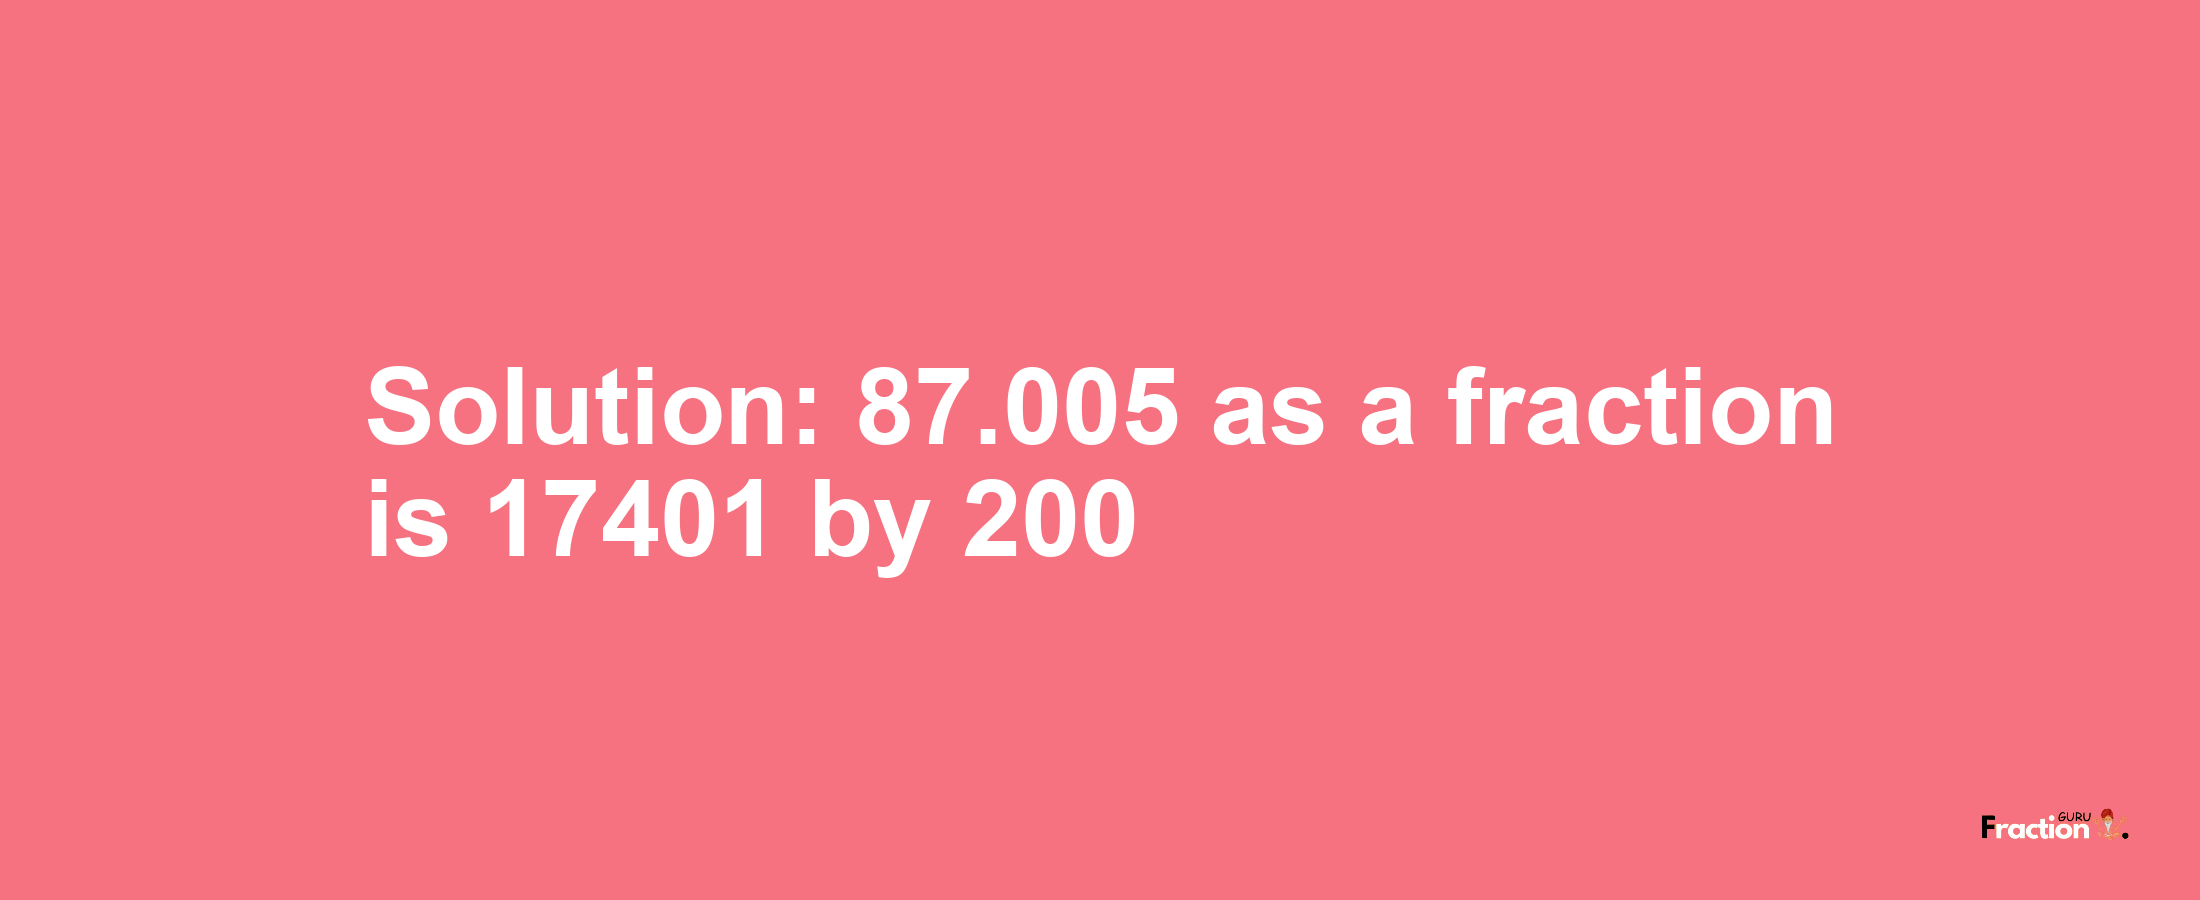 Solution:87.005 as a fraction is 17401/200